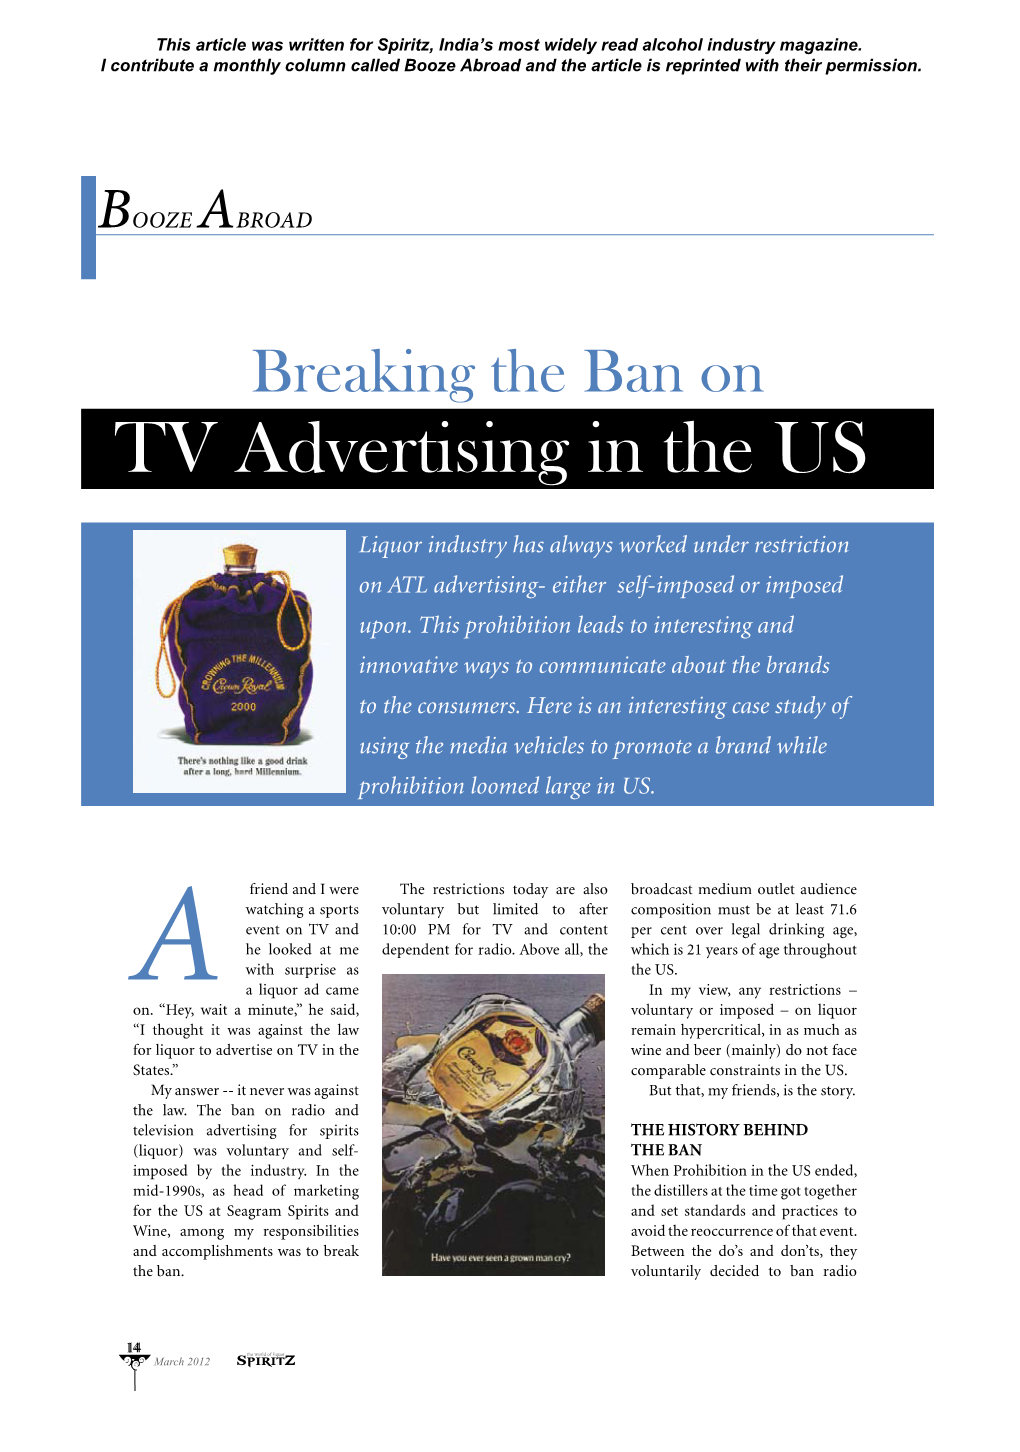 TV Advertising in the US